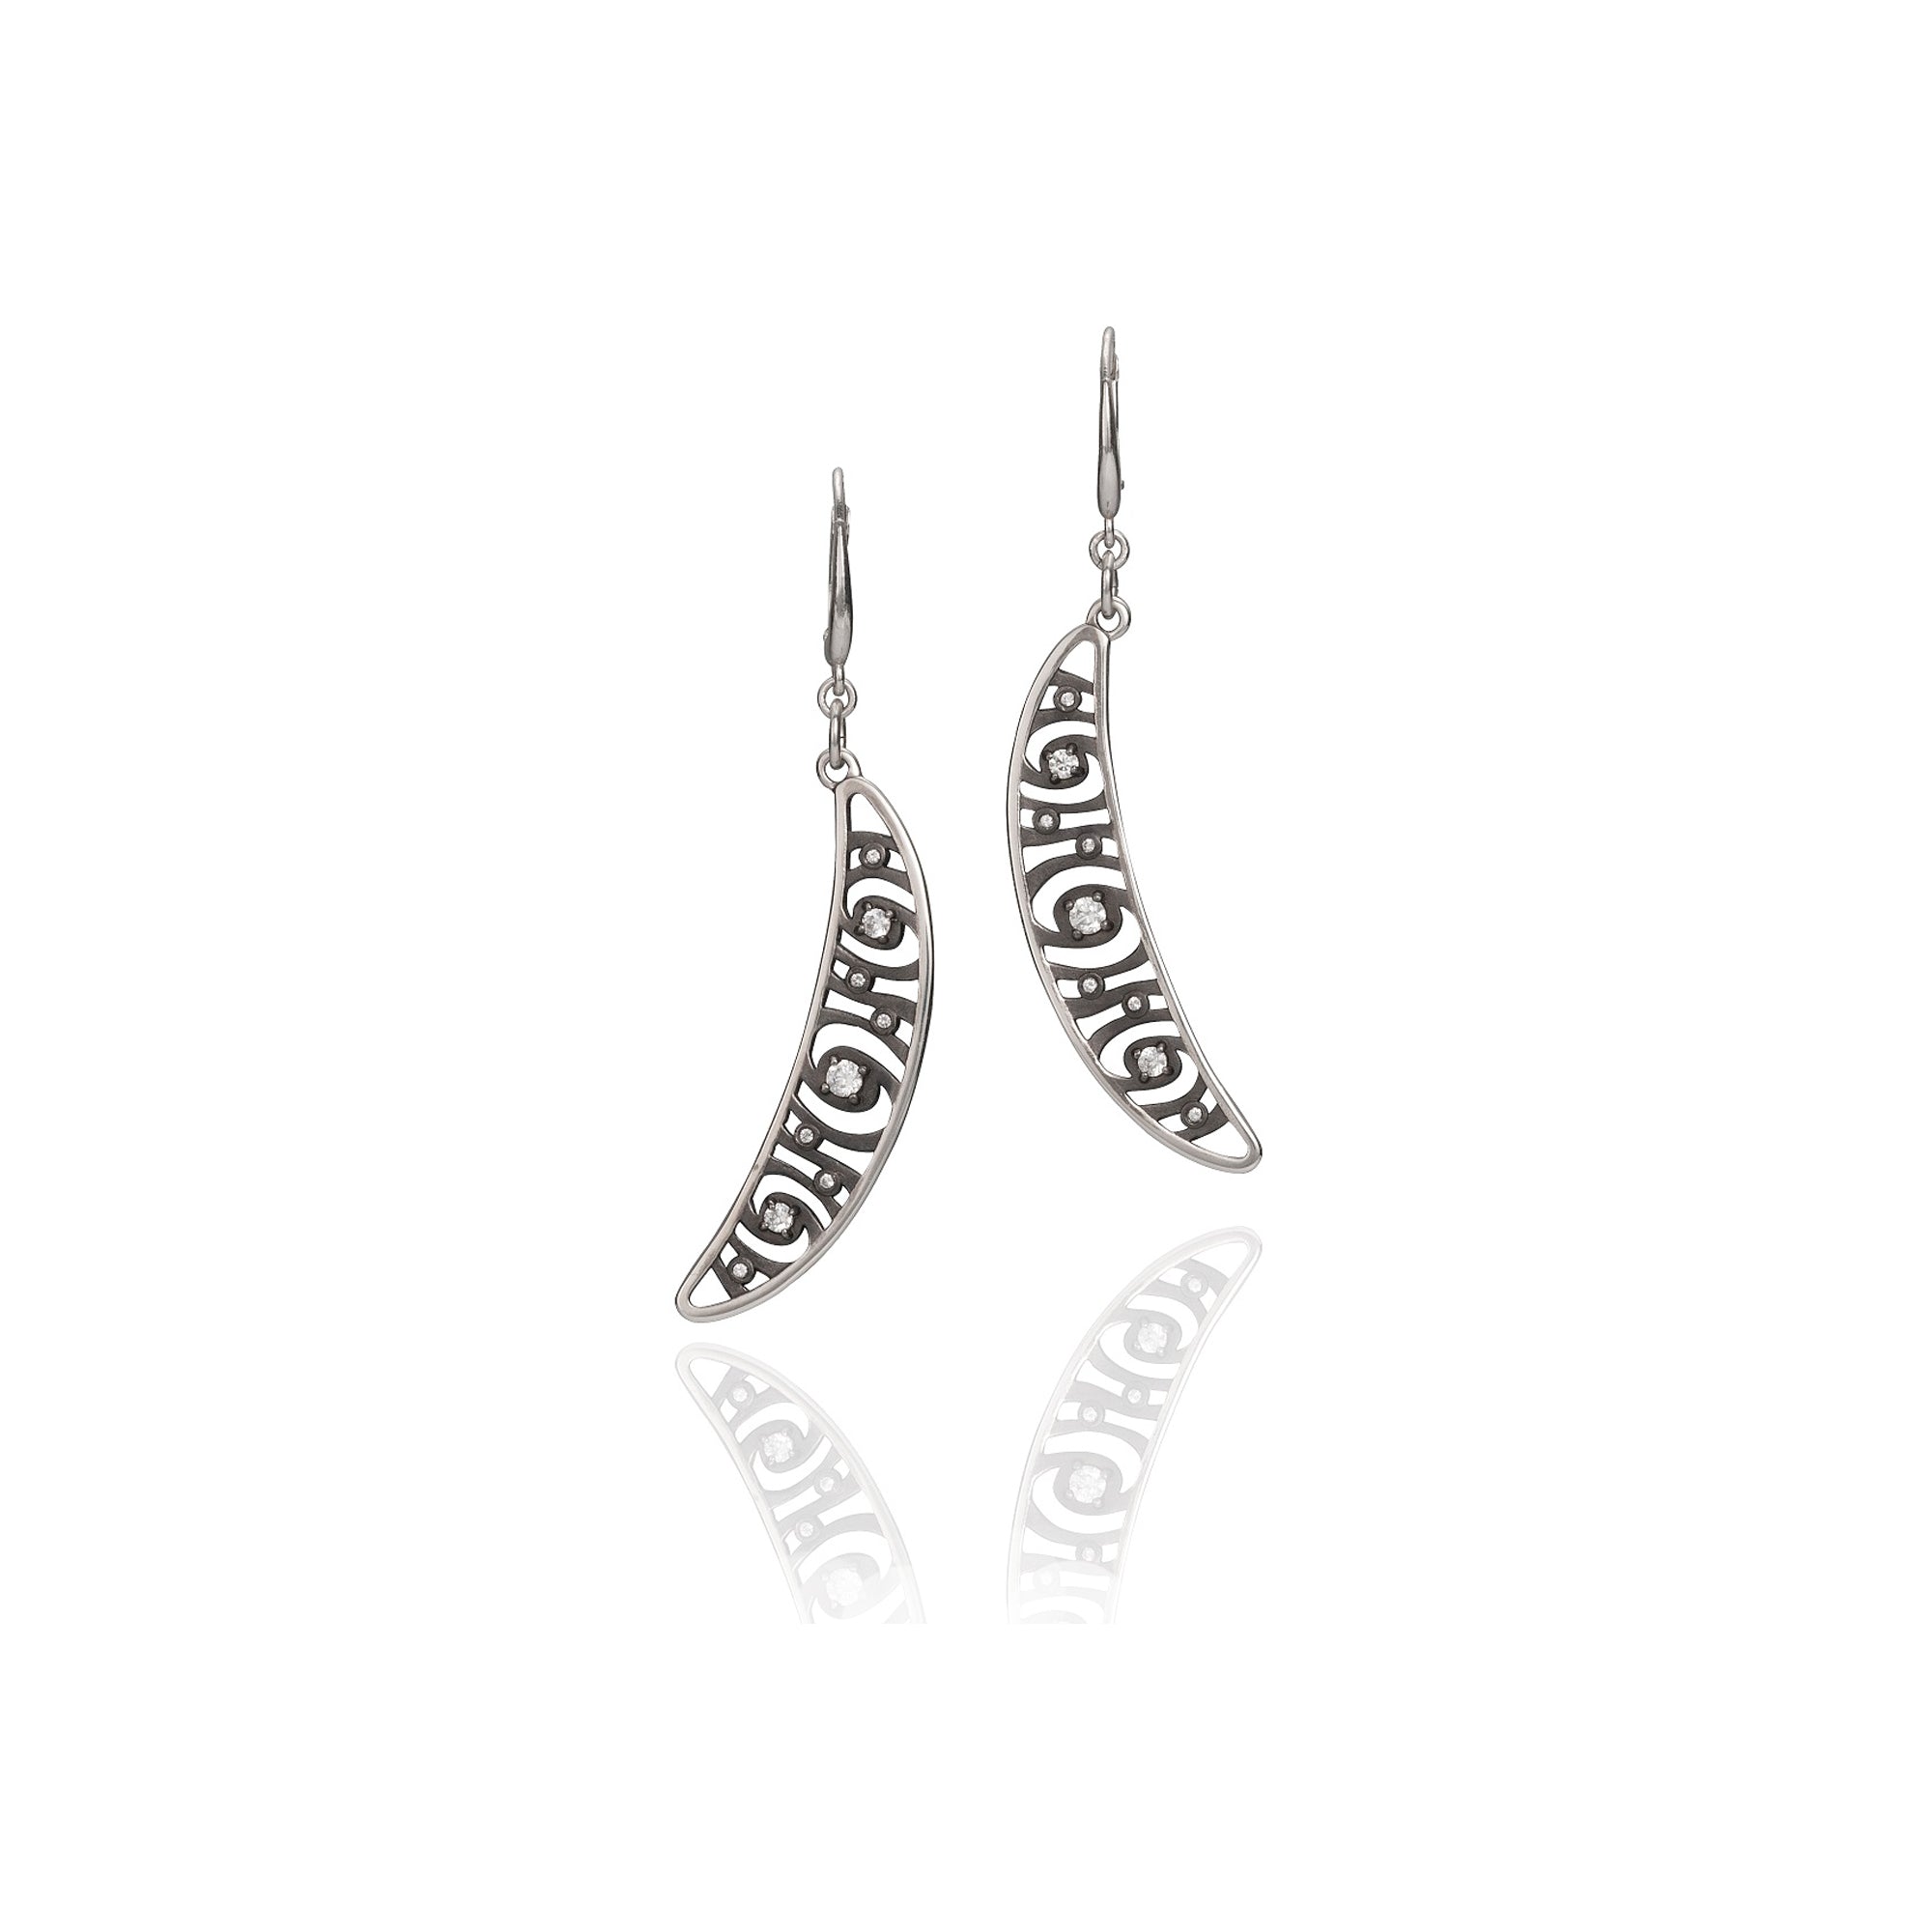 Shooting Stars Drop Earrings by Martha Seely - Talisman Collection Fine Jewelers